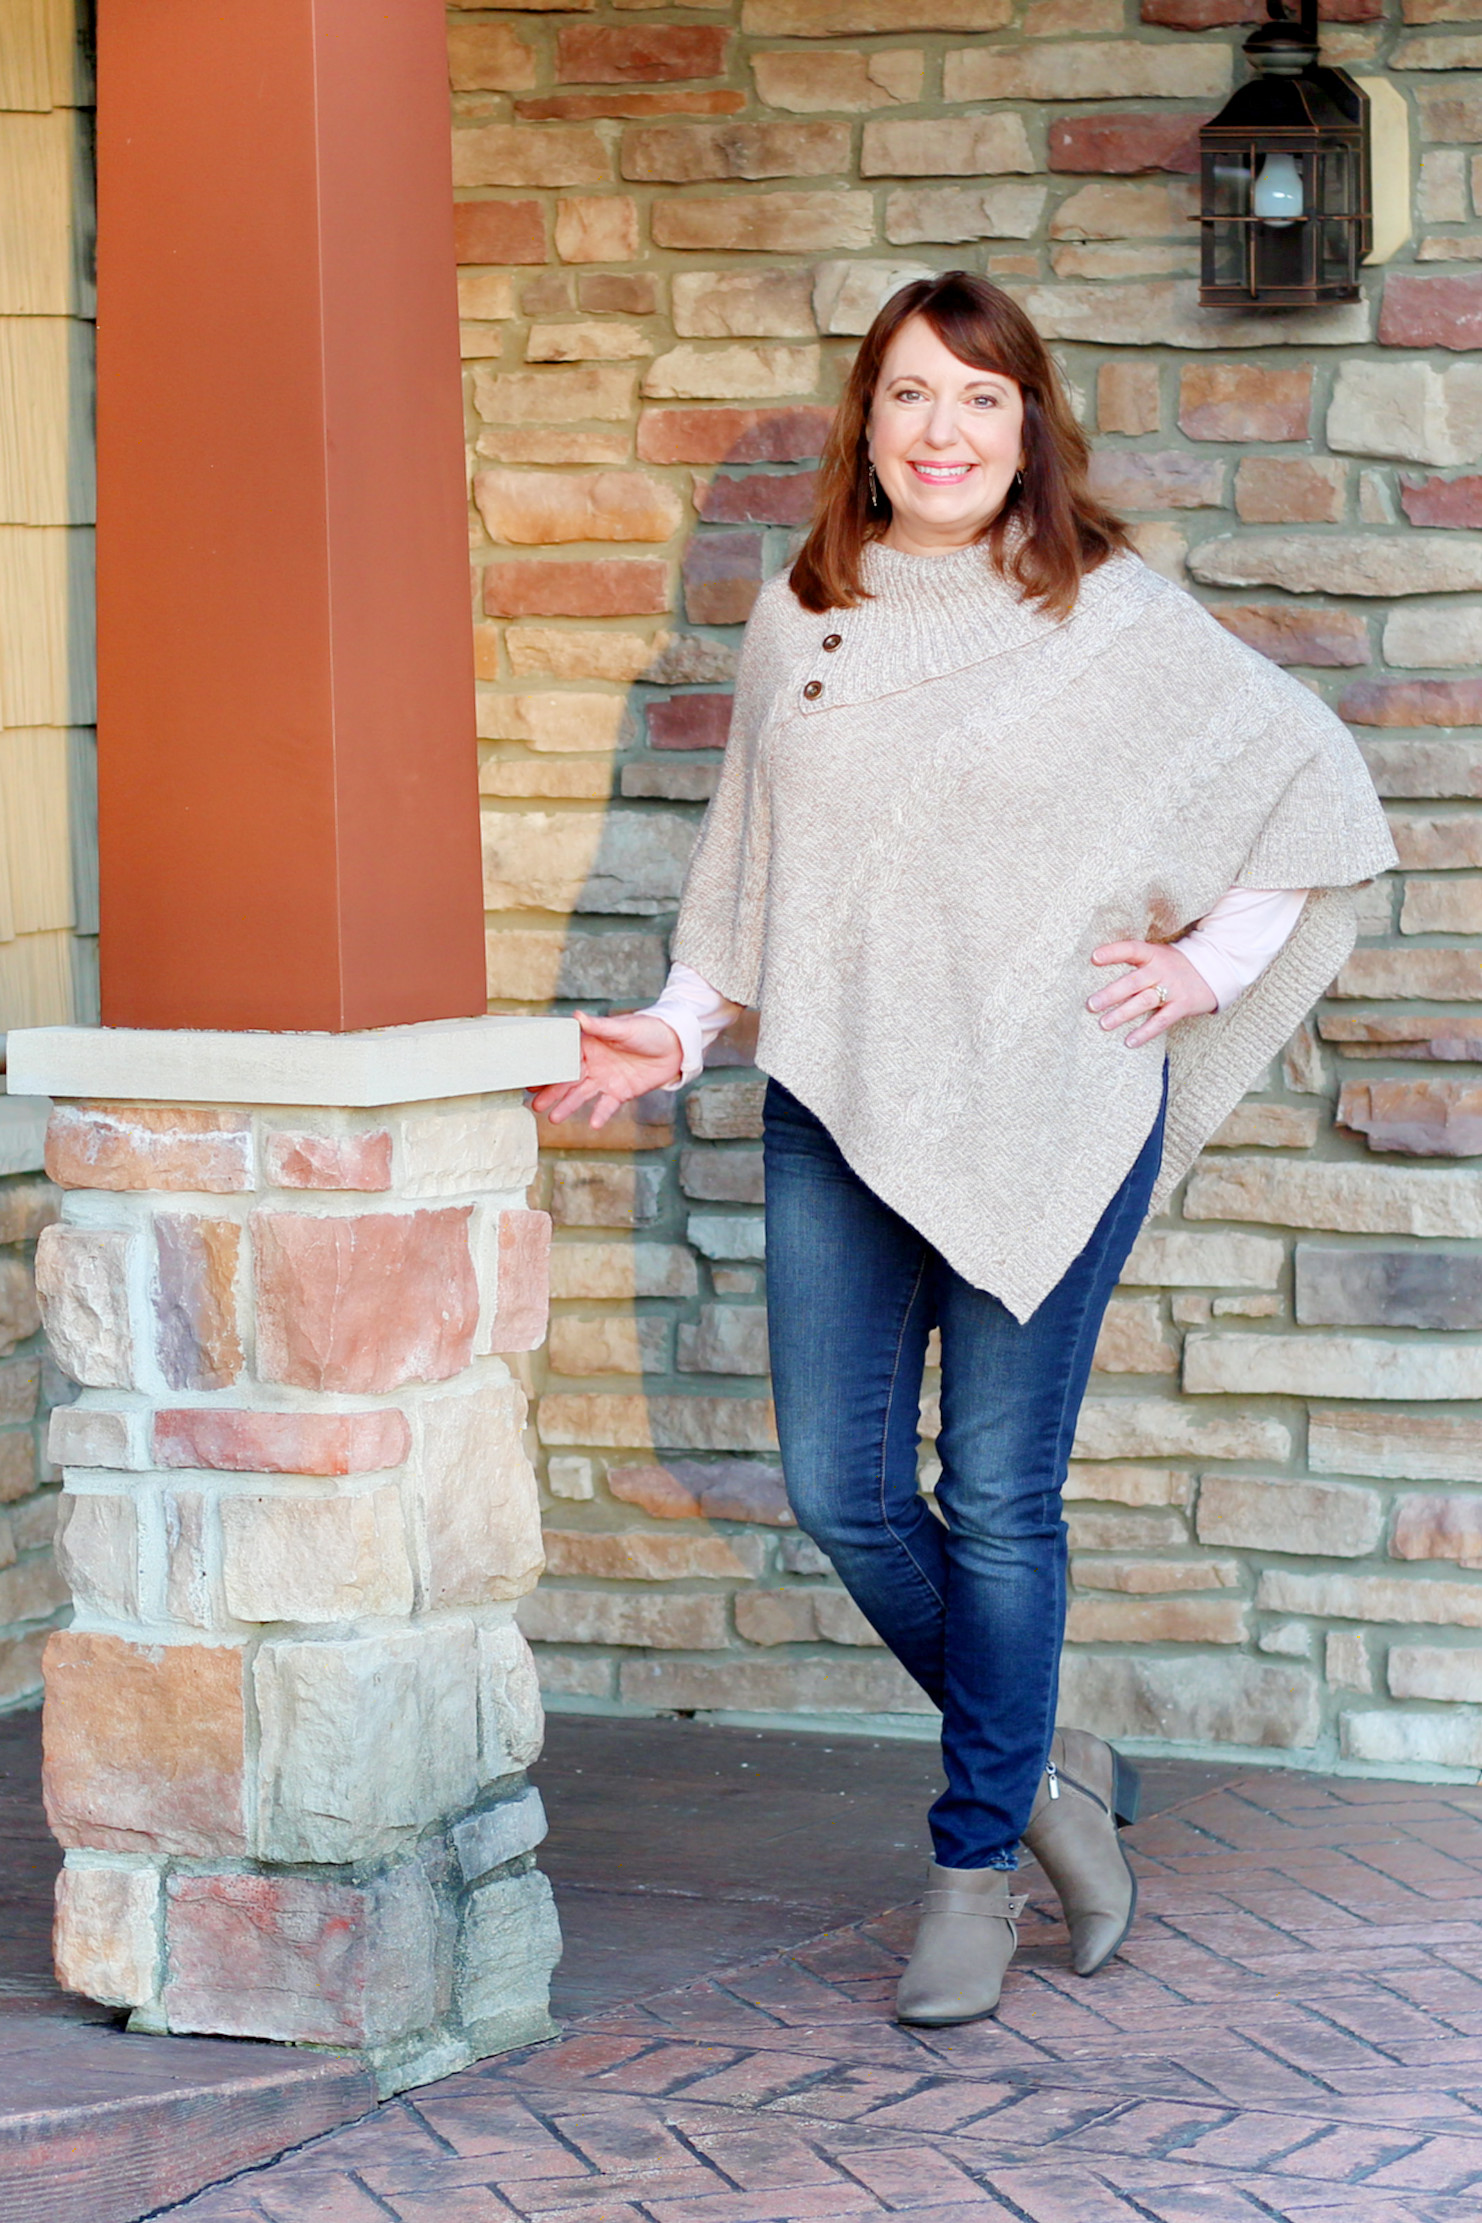 I love this Karen Scott poncho!  It is so soft and comfortable at an amazing price!  #shoppingoutfit #poncho  #ponchooutfit #ponchooutfitwinter 